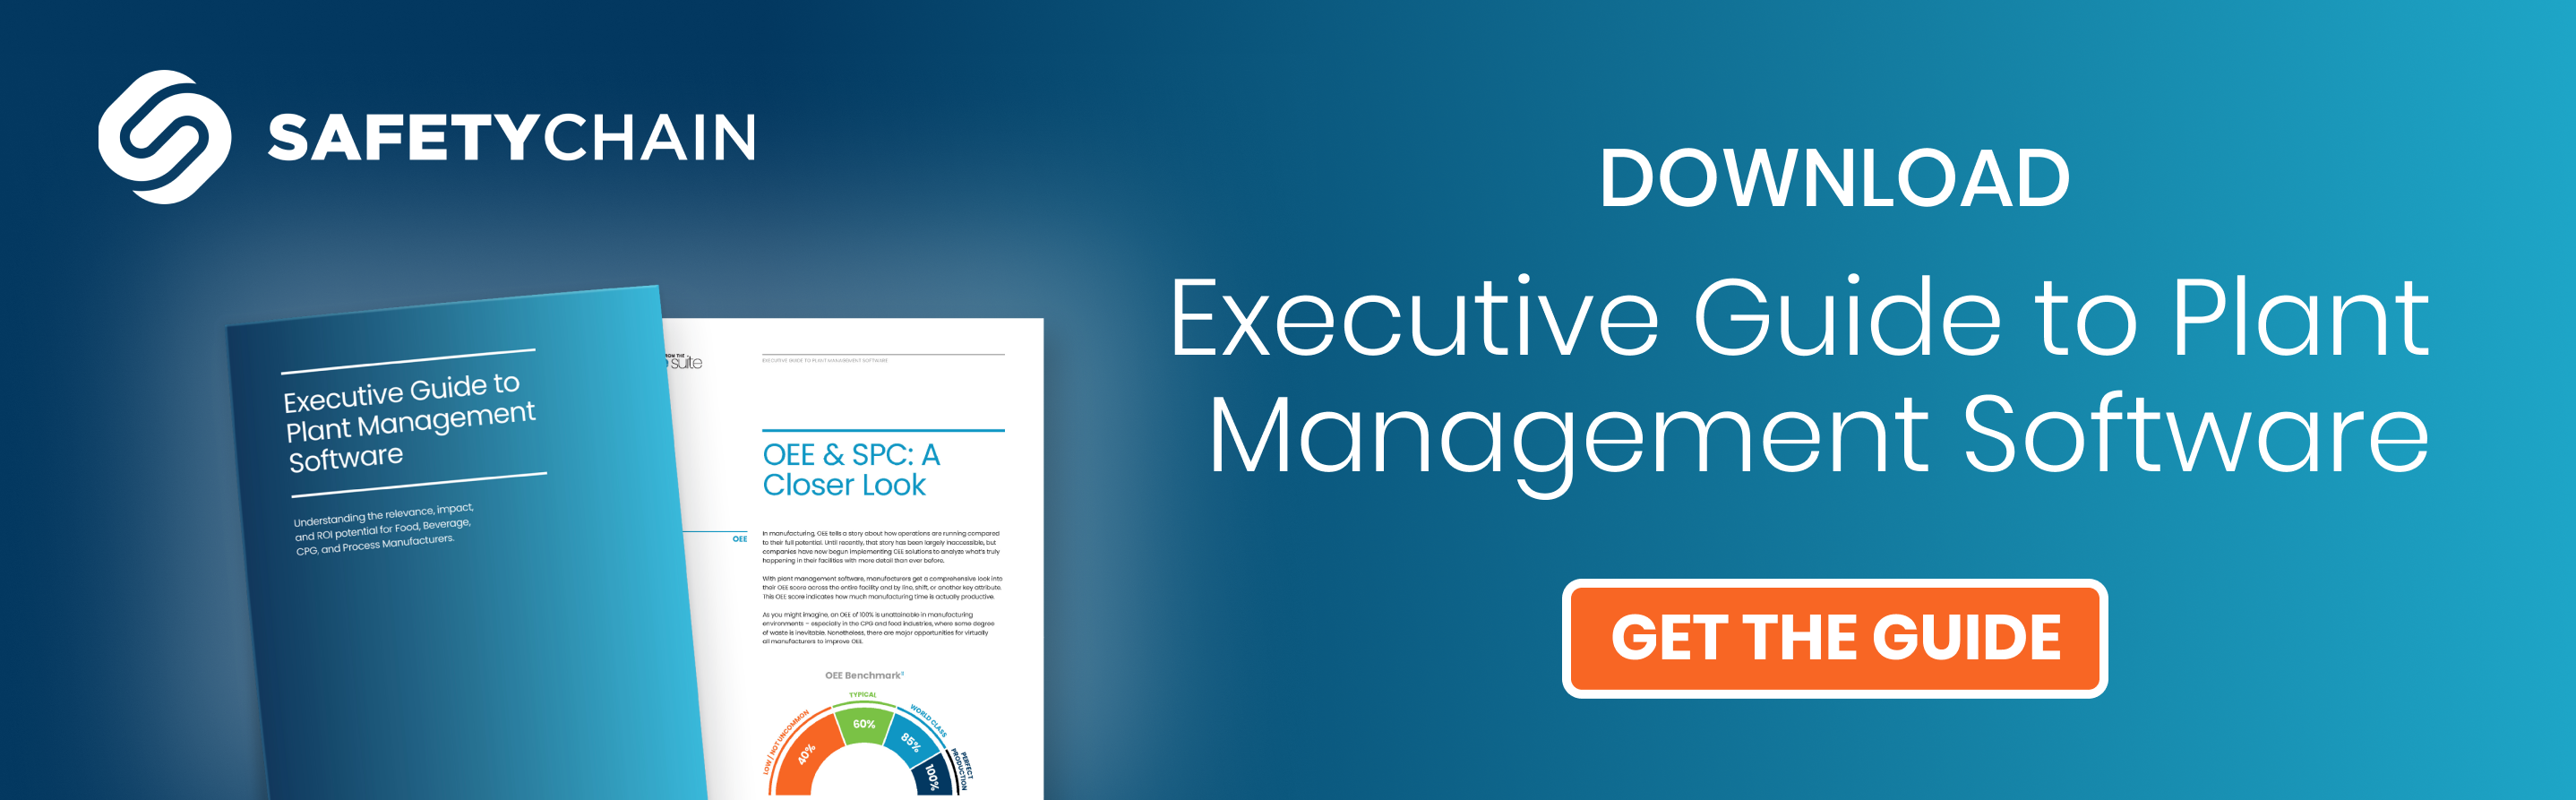 Executive Guide to Plant Management Software